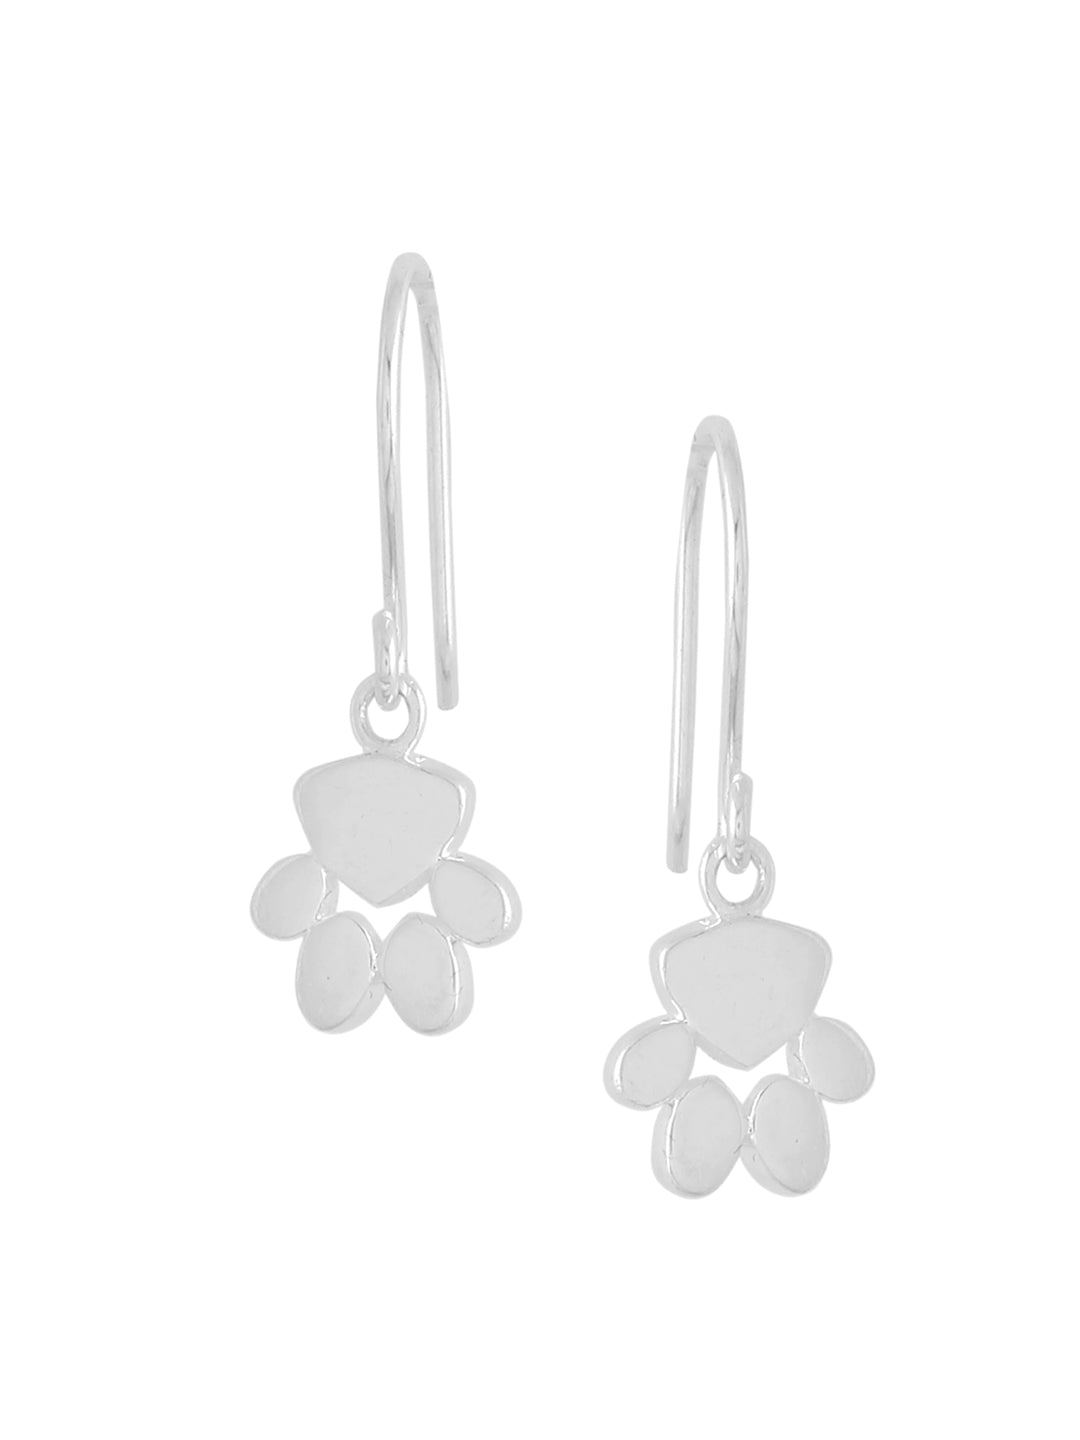 Adorable Dog Paw Silver Earrings